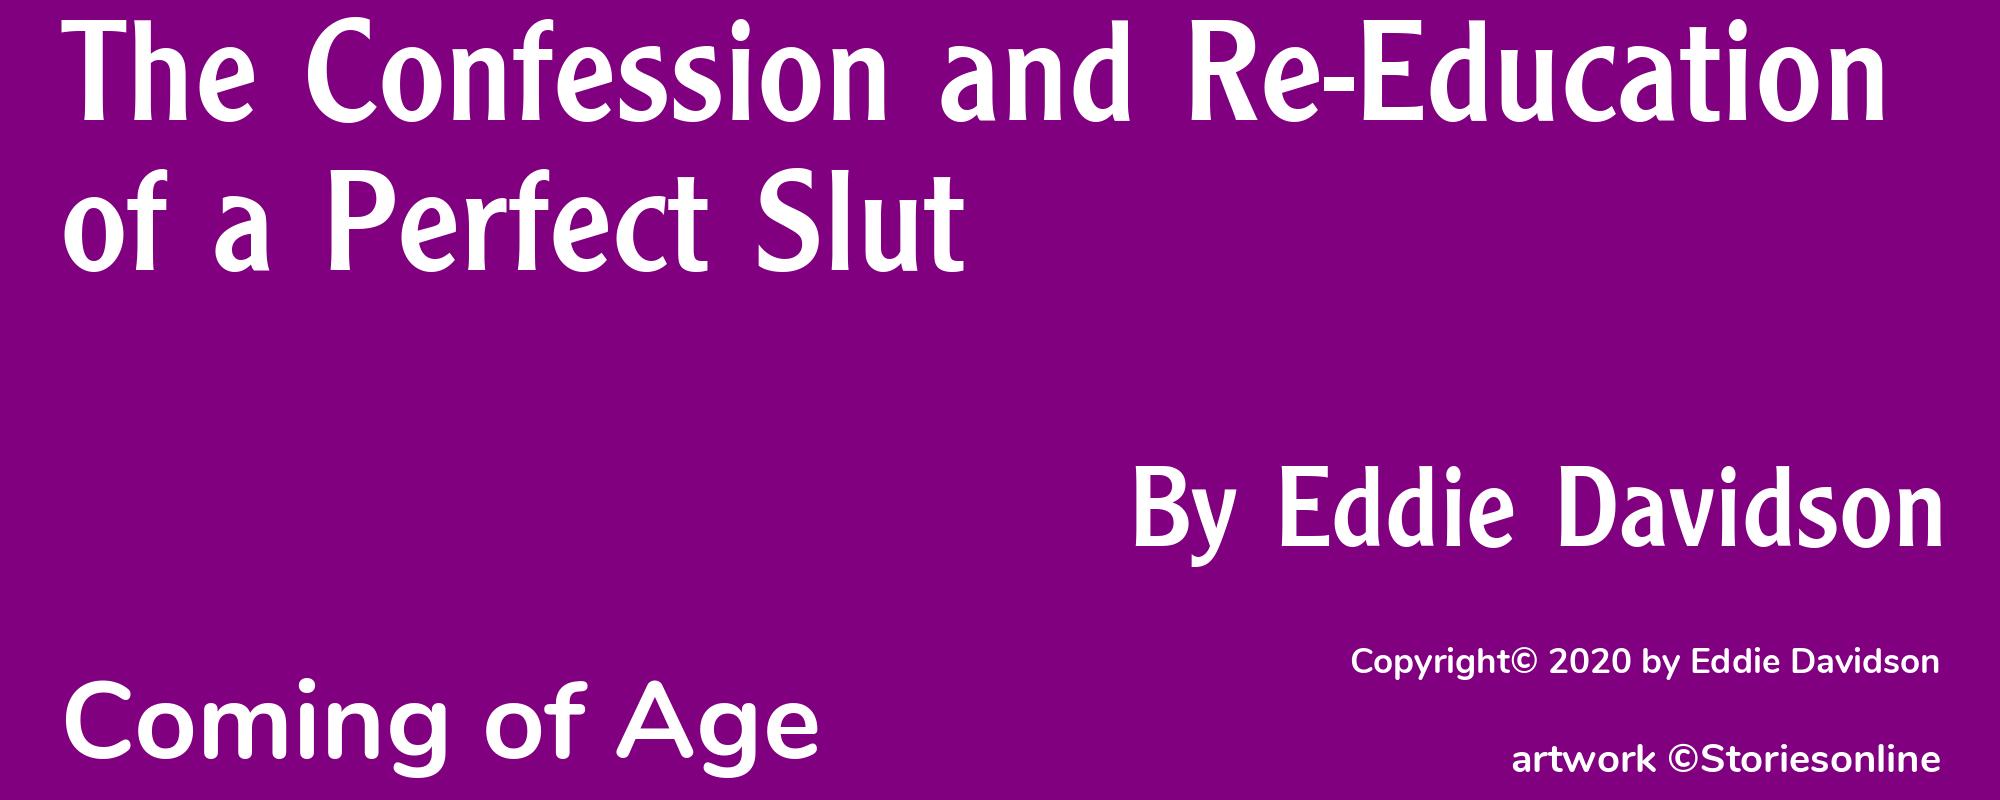 The Confession and Re-Education of a Perfect Slut - Cover